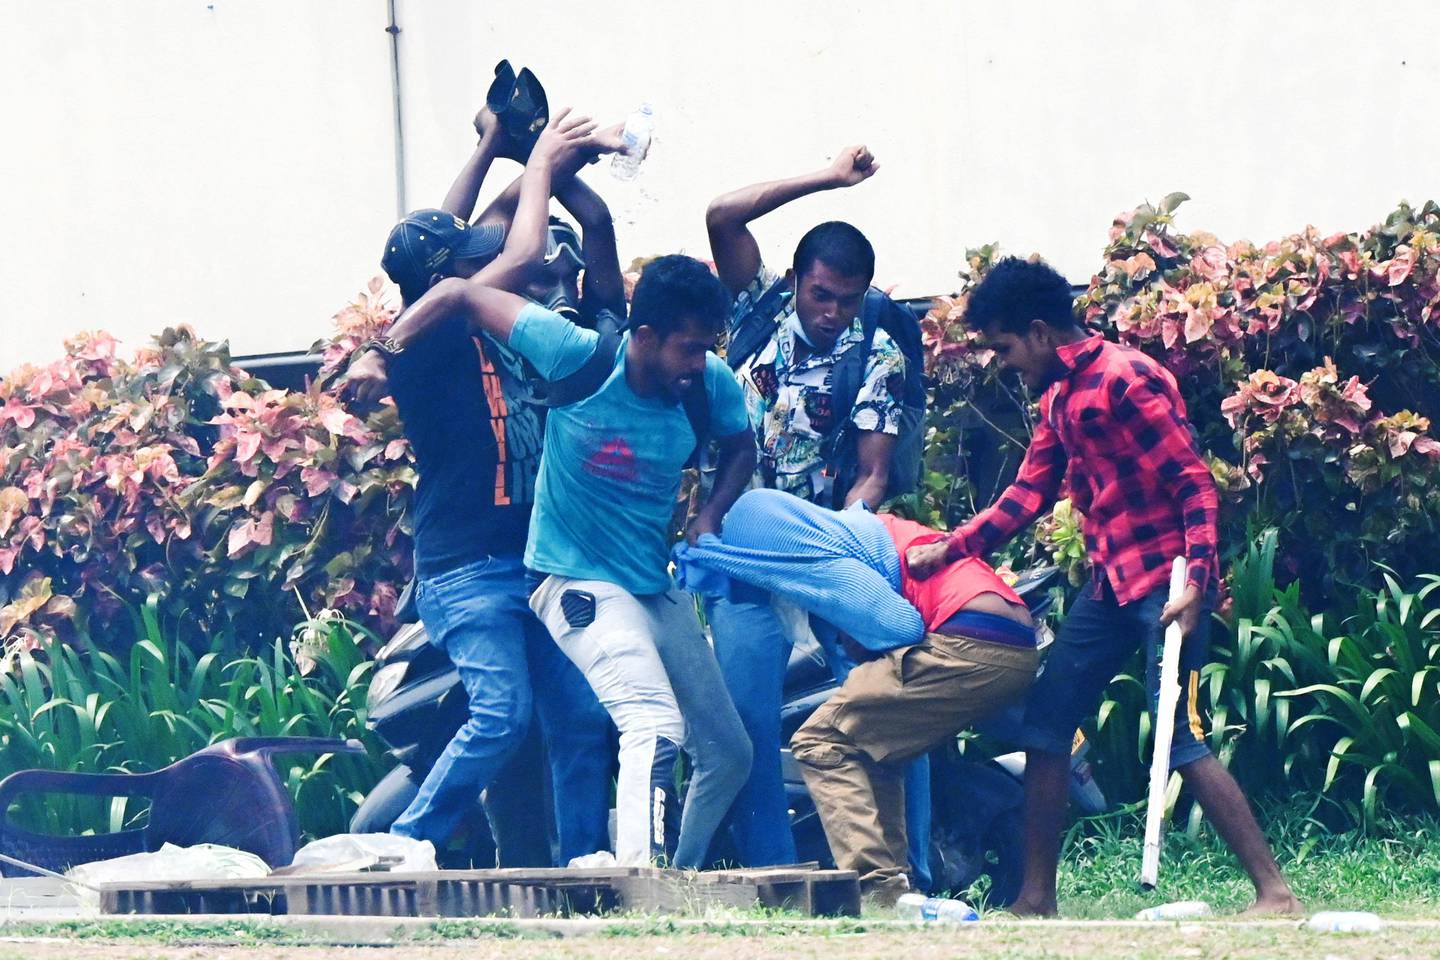 Demonstrators and government supporters clash outside the president's office in Colombo on Monday. AFP